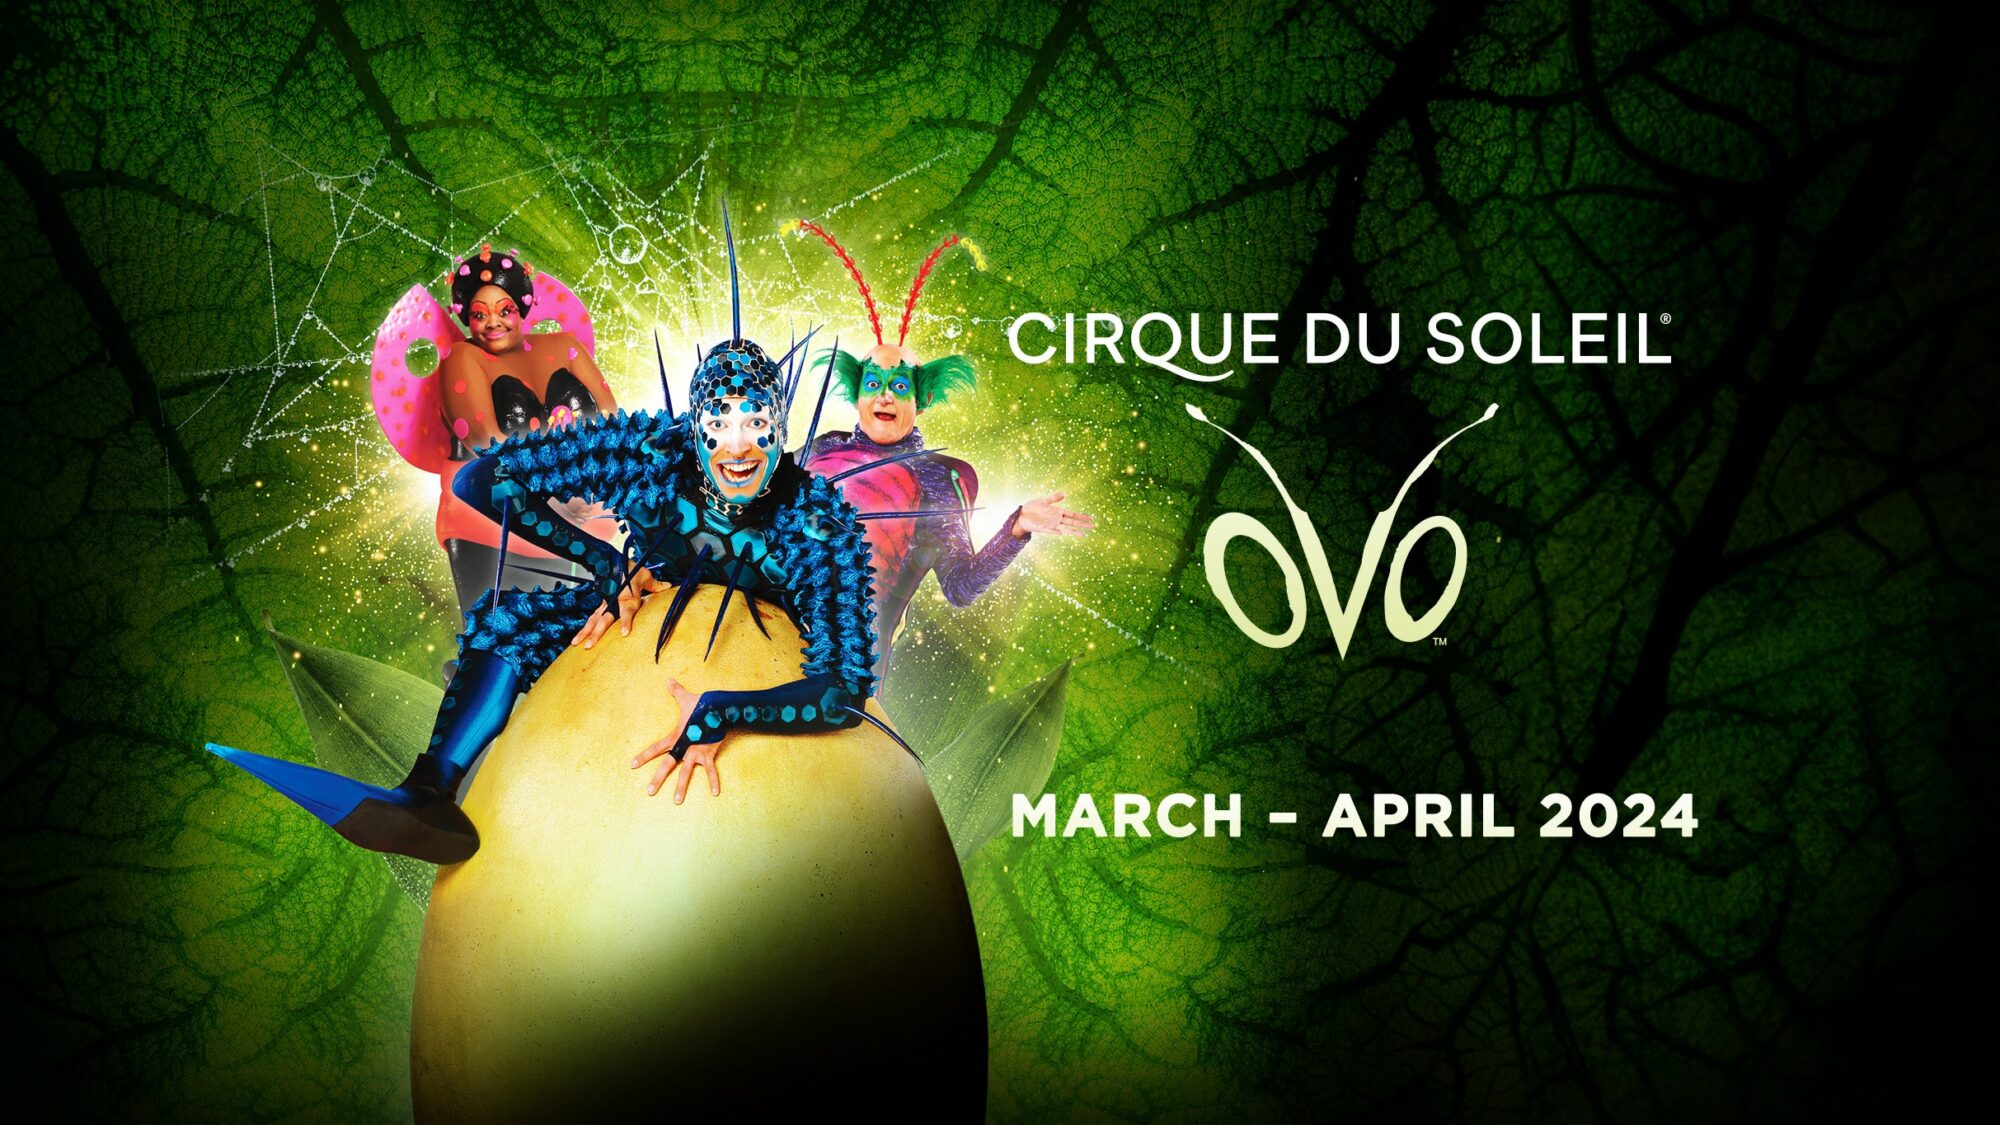 Image name Cirque Du Soleil Ovo at First Direct Arena Leeds the 1 image from the post Cirque Du Soleil : Ovo at First Direct Arena, Leeds in Yorkshire.com.